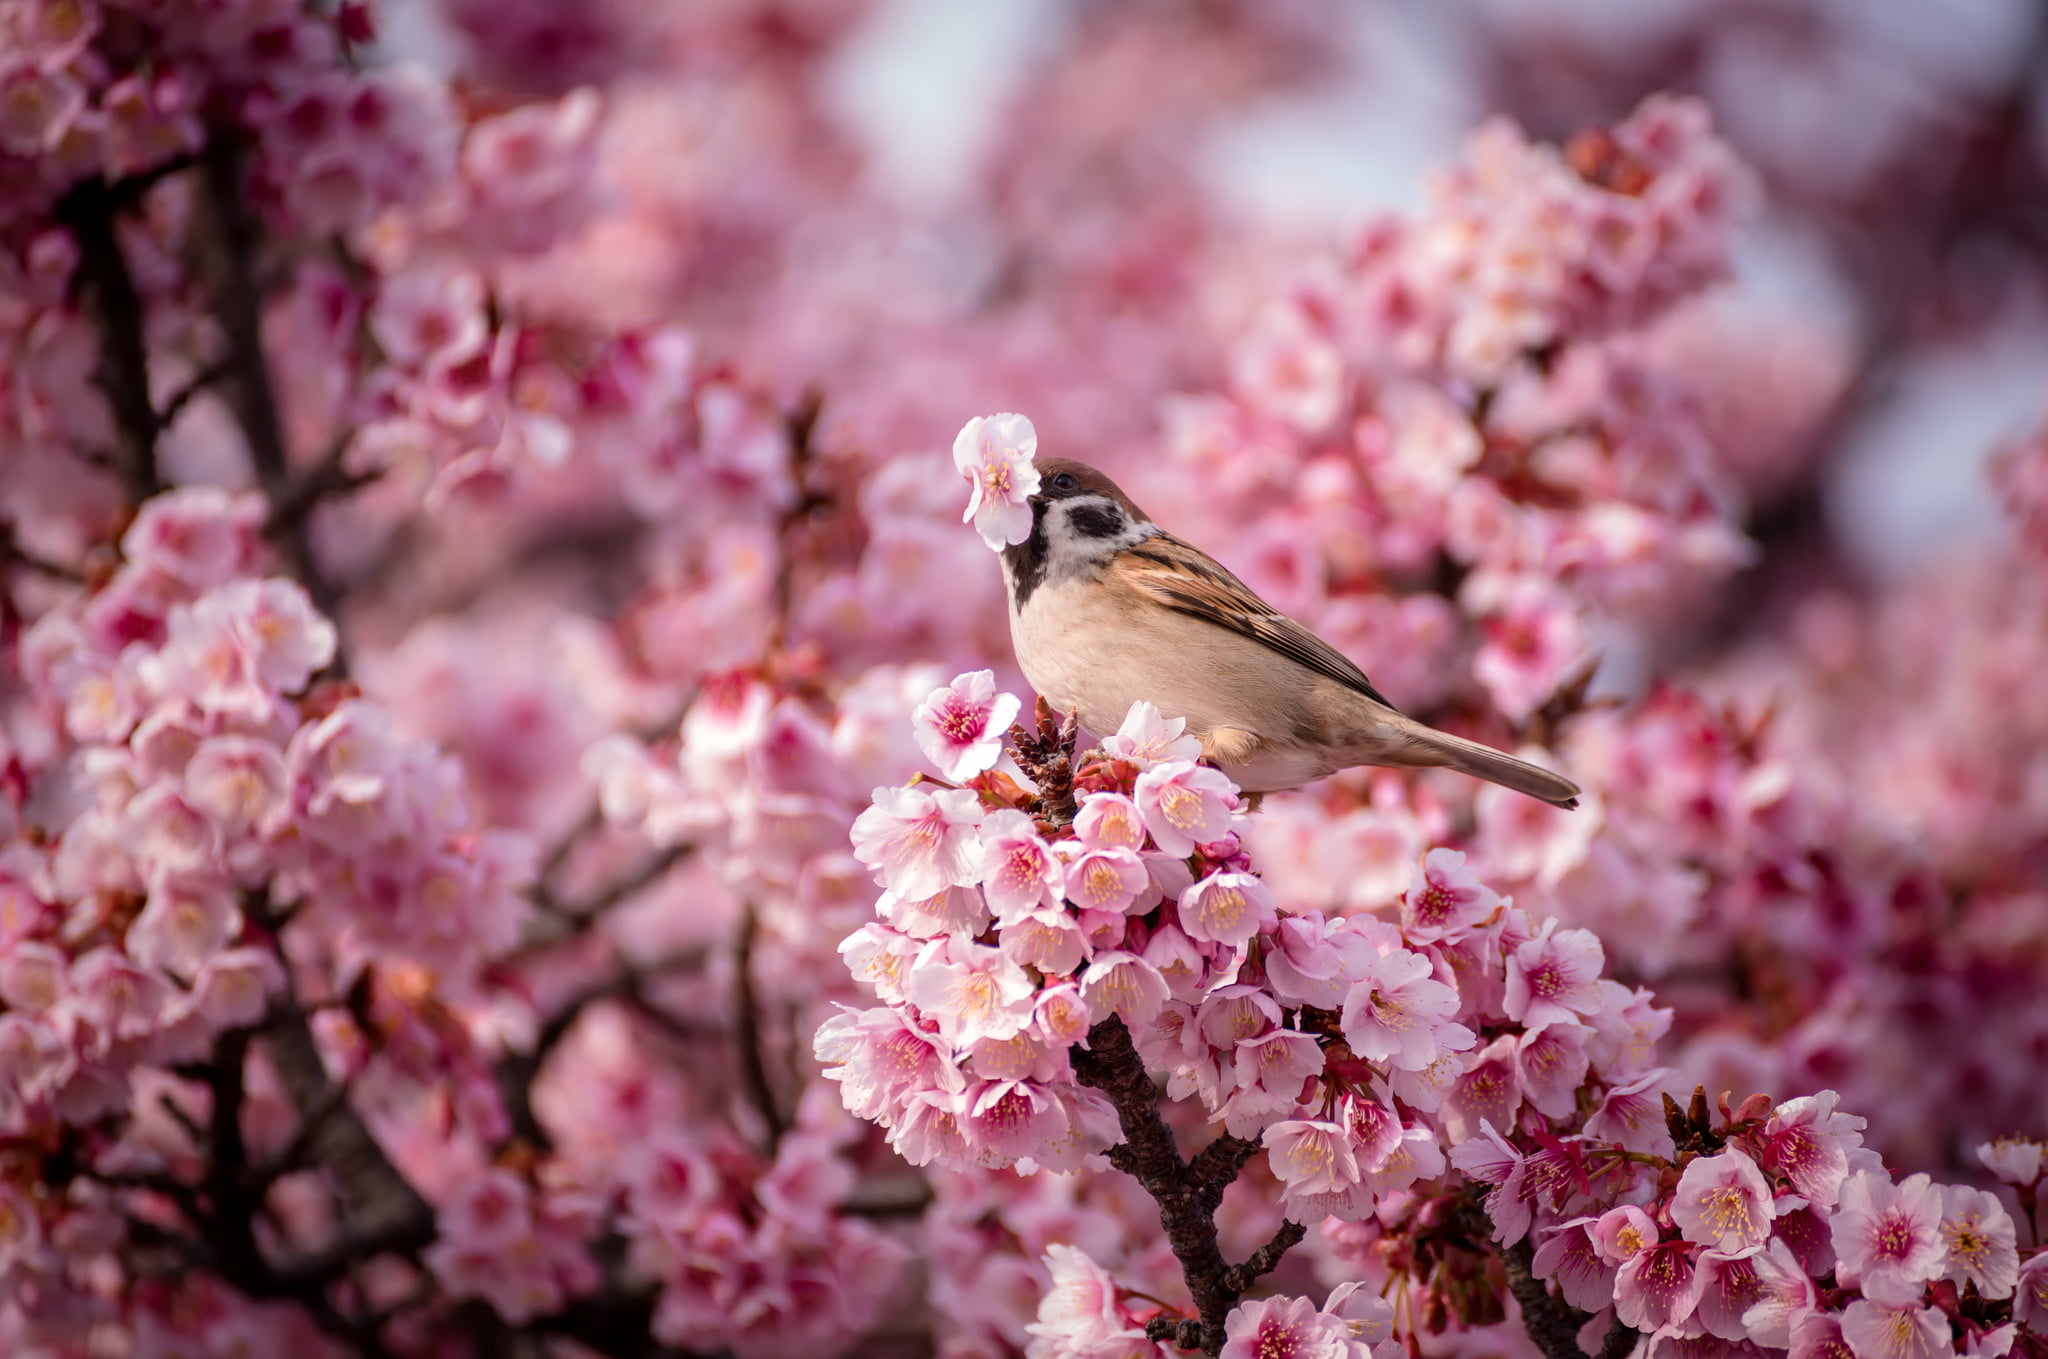 house sparrow, flowers, nature, bird, spring, Cherry, pink, pink color